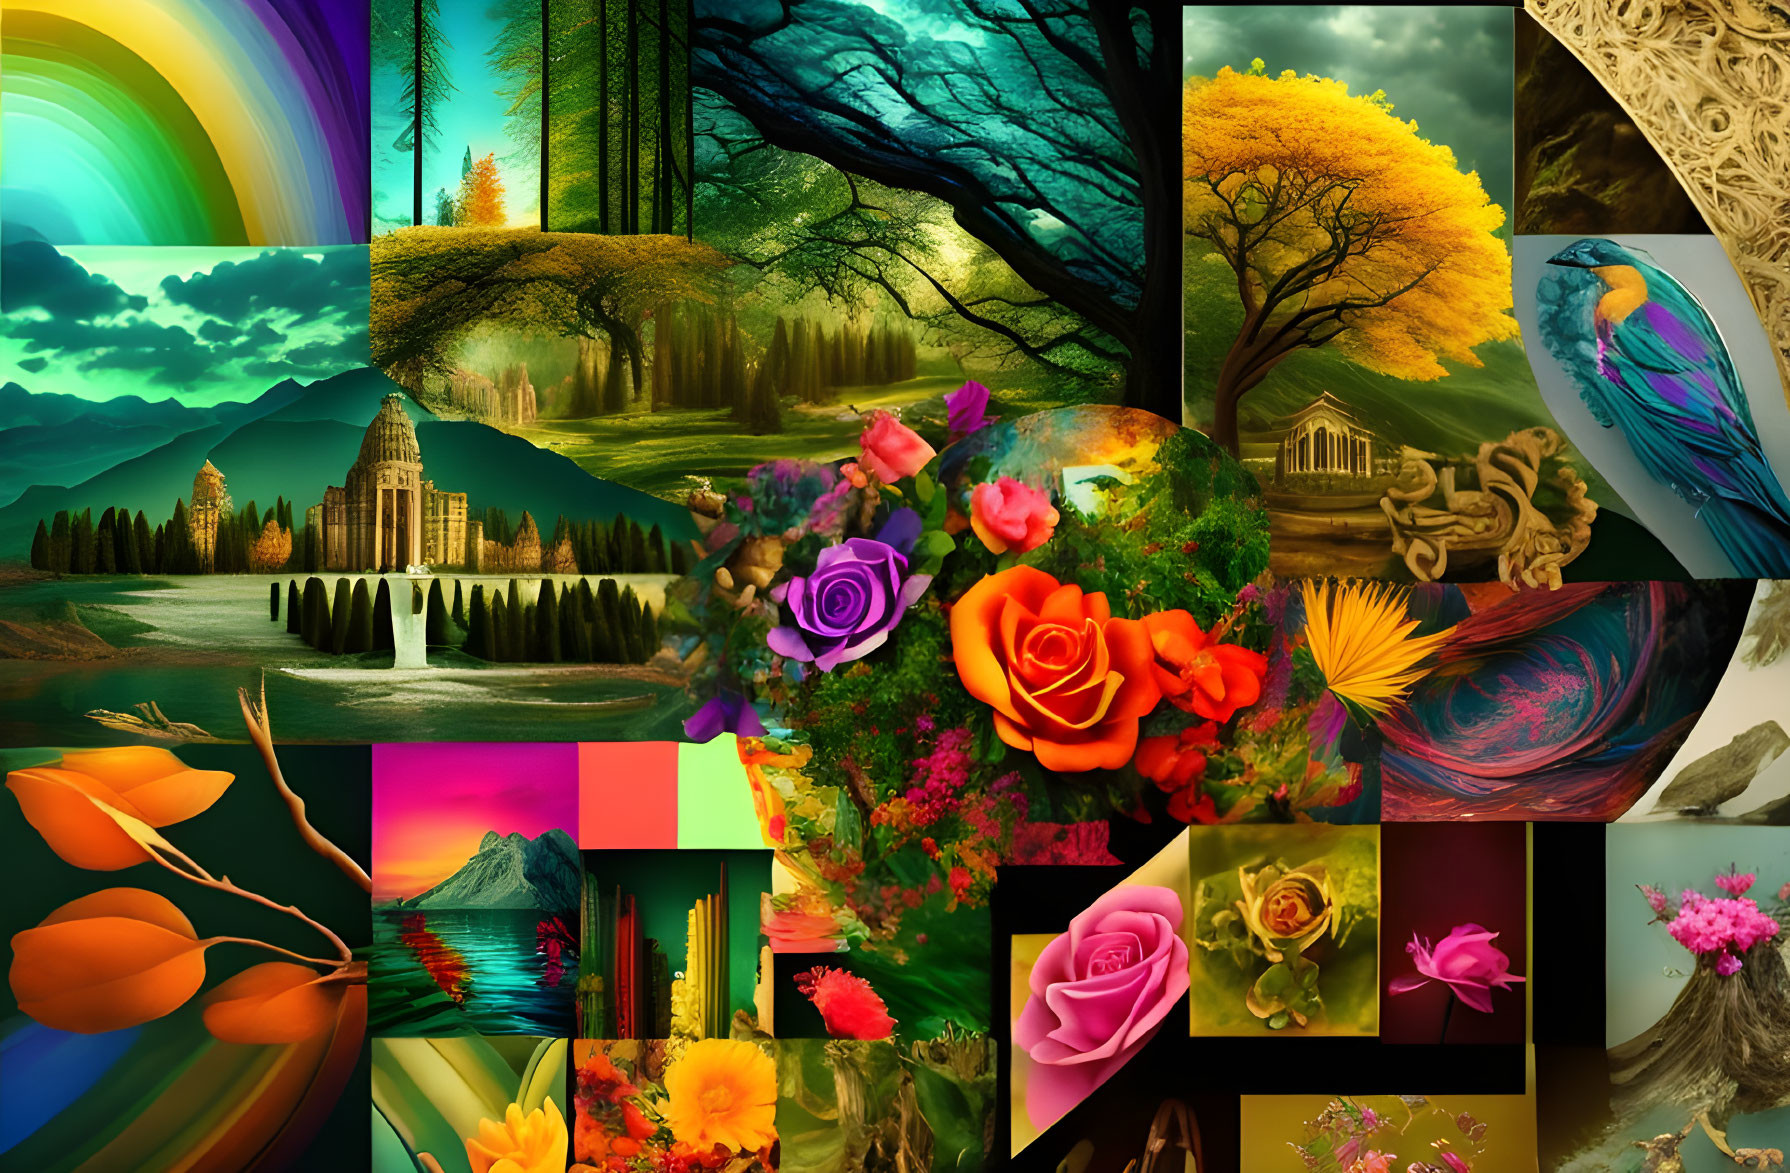 Nature and art collage featuring landscapes, flowers, vivid colors